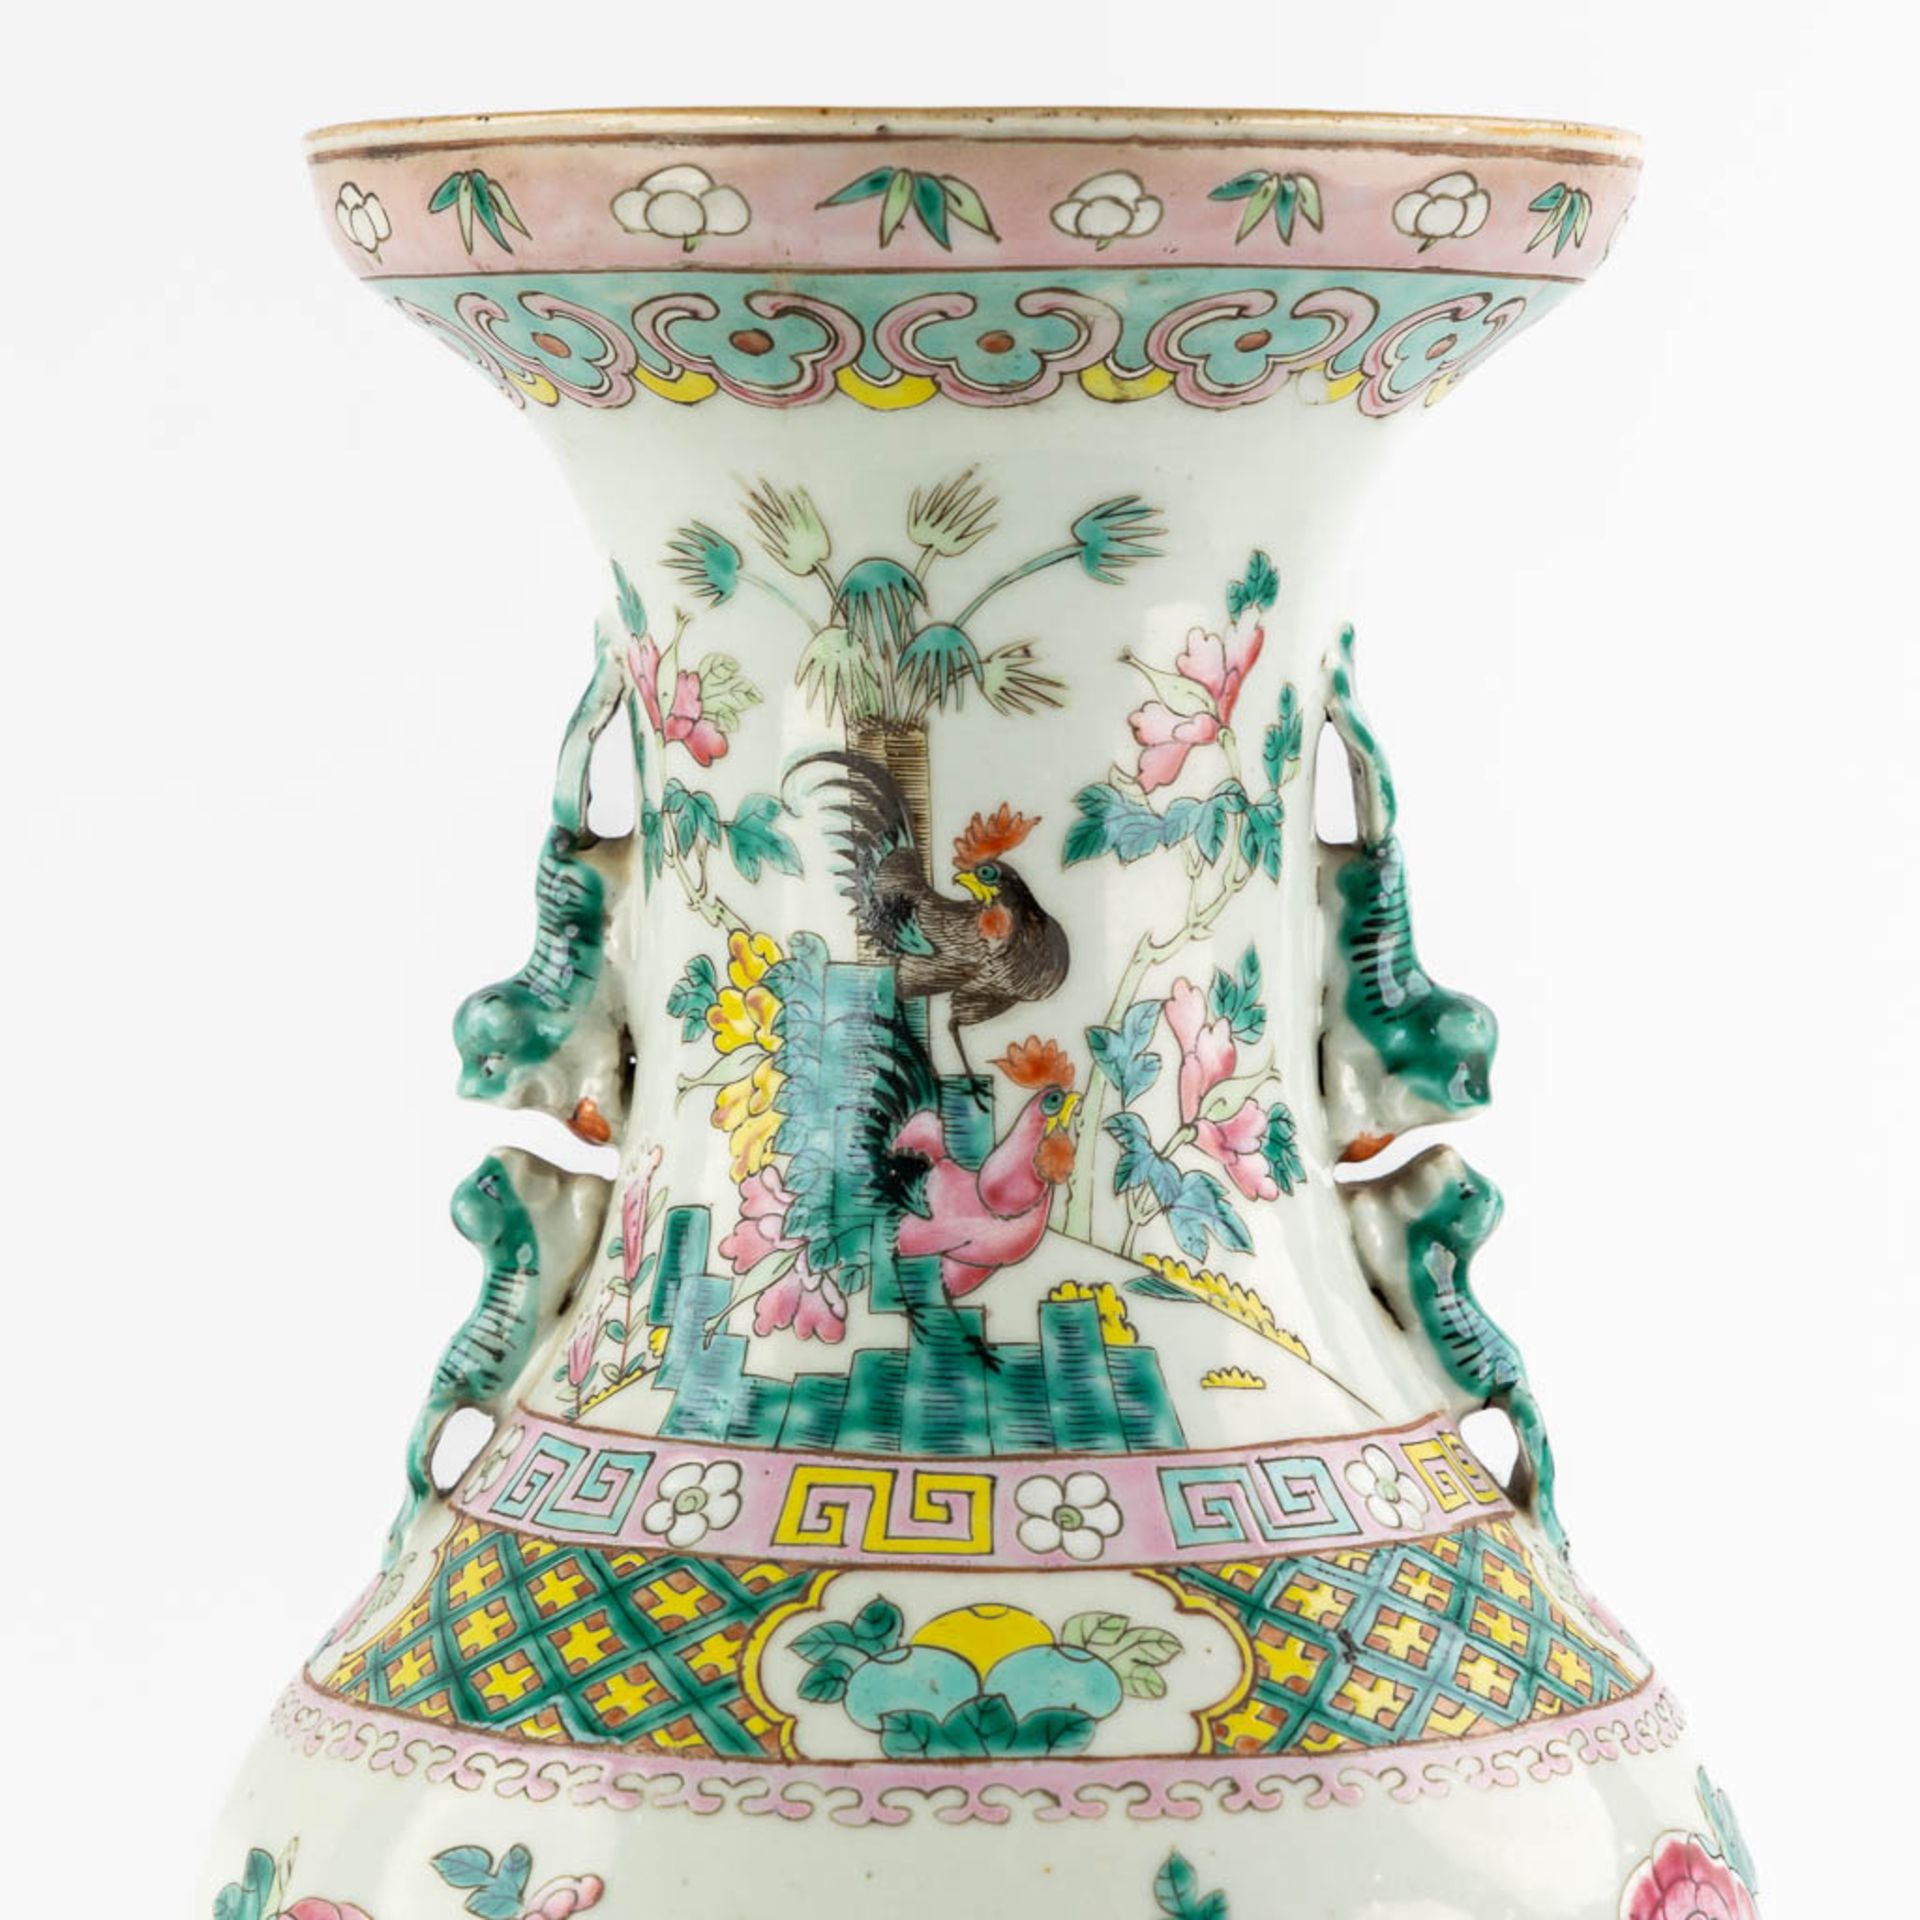 A large Chinese Famille Rose vase decorated with Chicken and Flora. (H:59 x D:23 cm) - Image 7 of 11